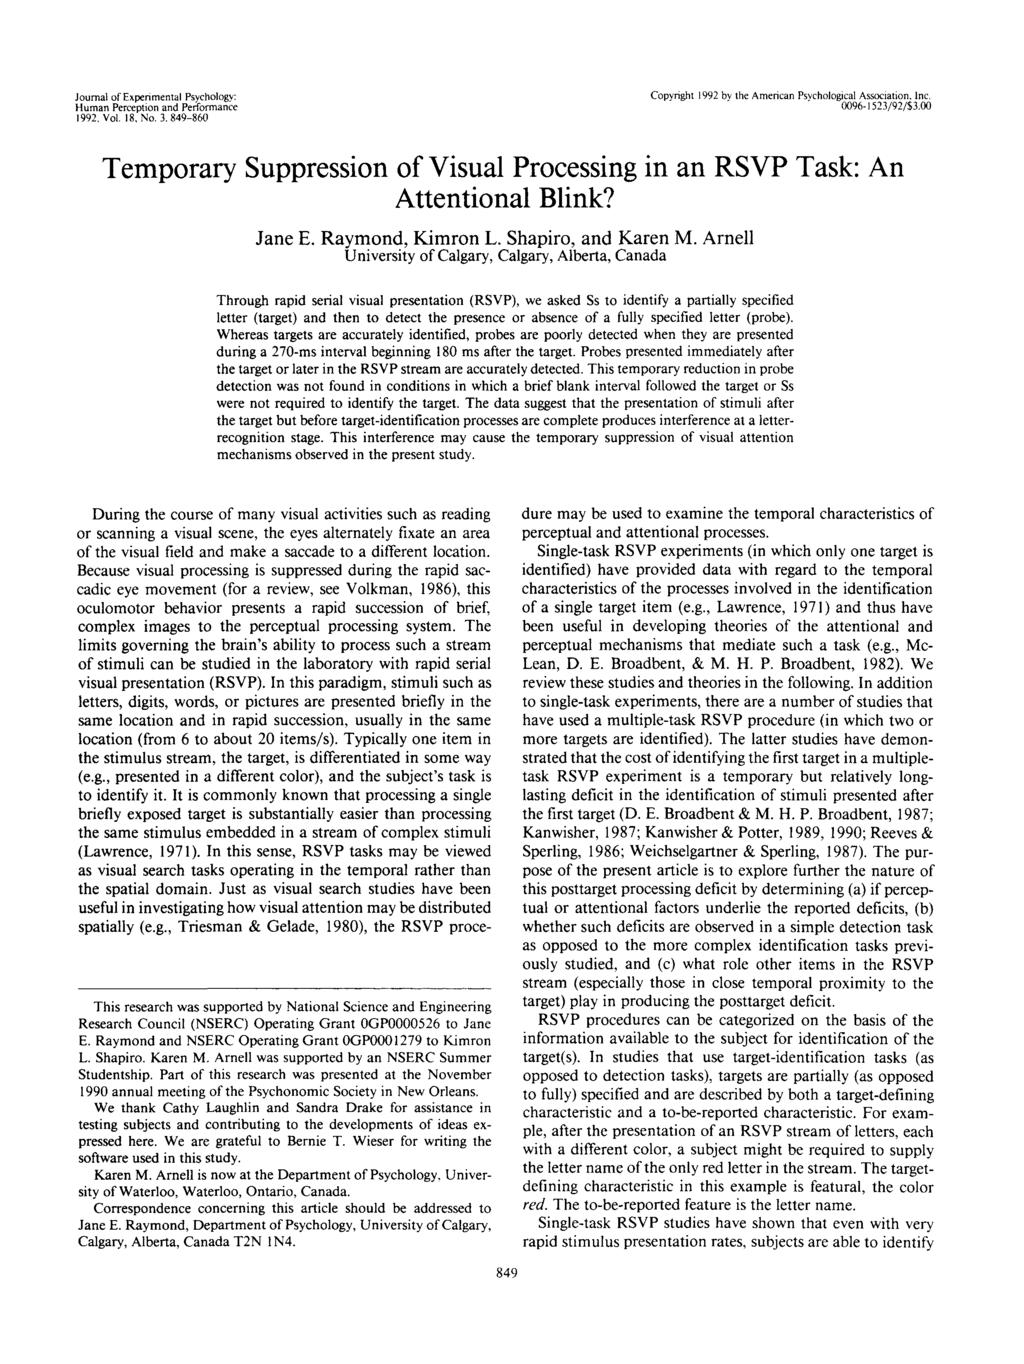 Journal of Experimental Psychology: Human Perception and Performance 1992. Vol. 18. No. 3. 849-860 Copyright 1992 by the American Psychological Association. Inc. 0096-1523/92/S3.